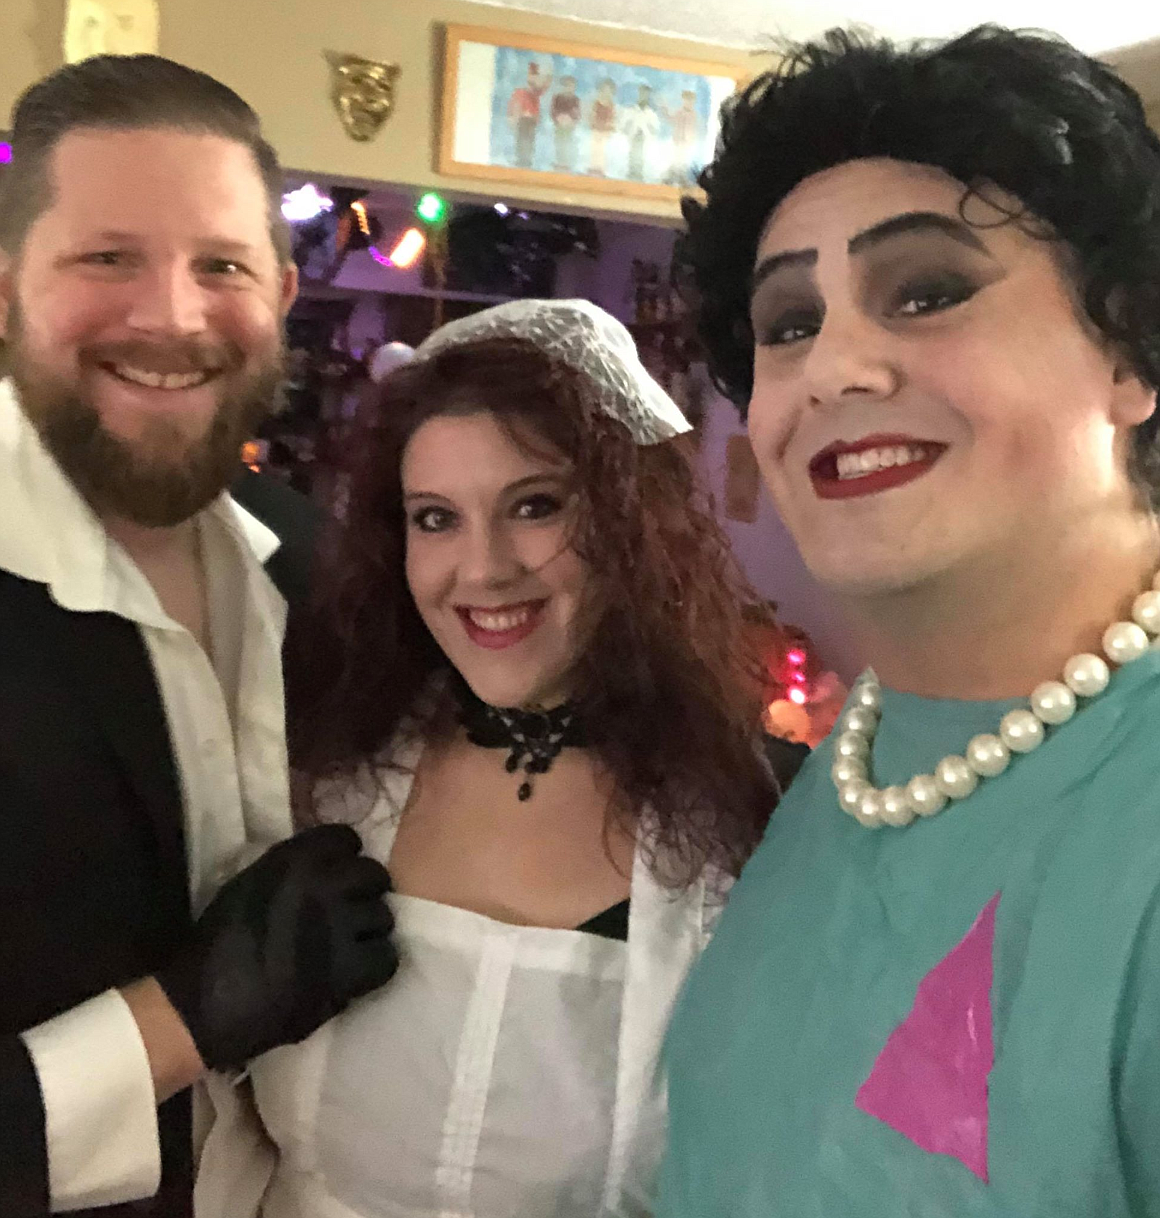 Courtesy photo
Chris and Jona Pease stand with Sean Shelley during the Sixth Street Theatre&#146;s screening of &#147;The Rocky Horror Picture Show.&#148; Chris dressed up as Riff Raff, Jona as Magenta and Shelley as Dr. Frank N. Furter.